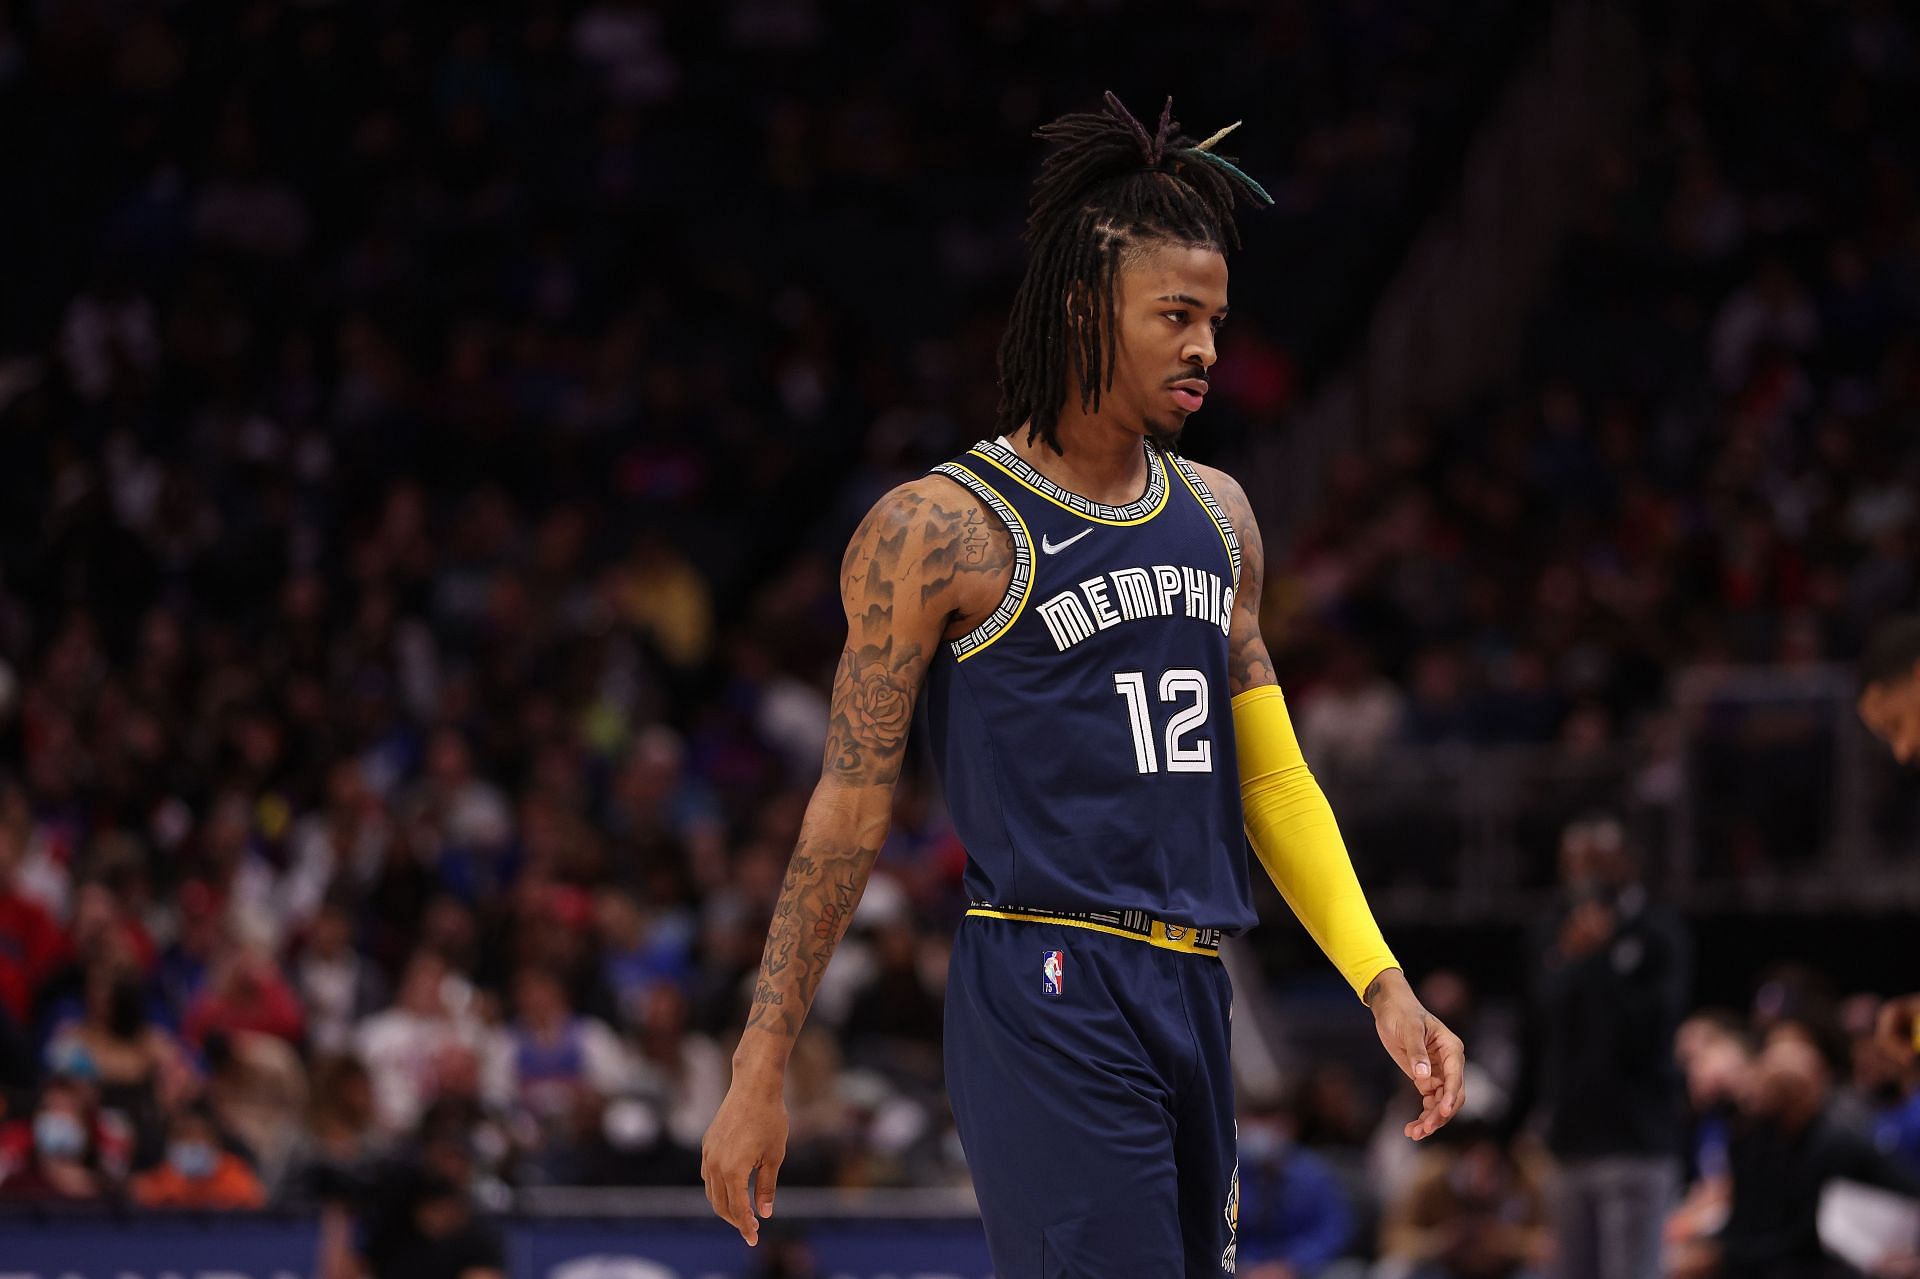 Ja Morant #12 of the Memphis Grizzlies plays against the Detroit Pistons at Little Caesars Arena on February 10, 2022 in Detroit, Michigan